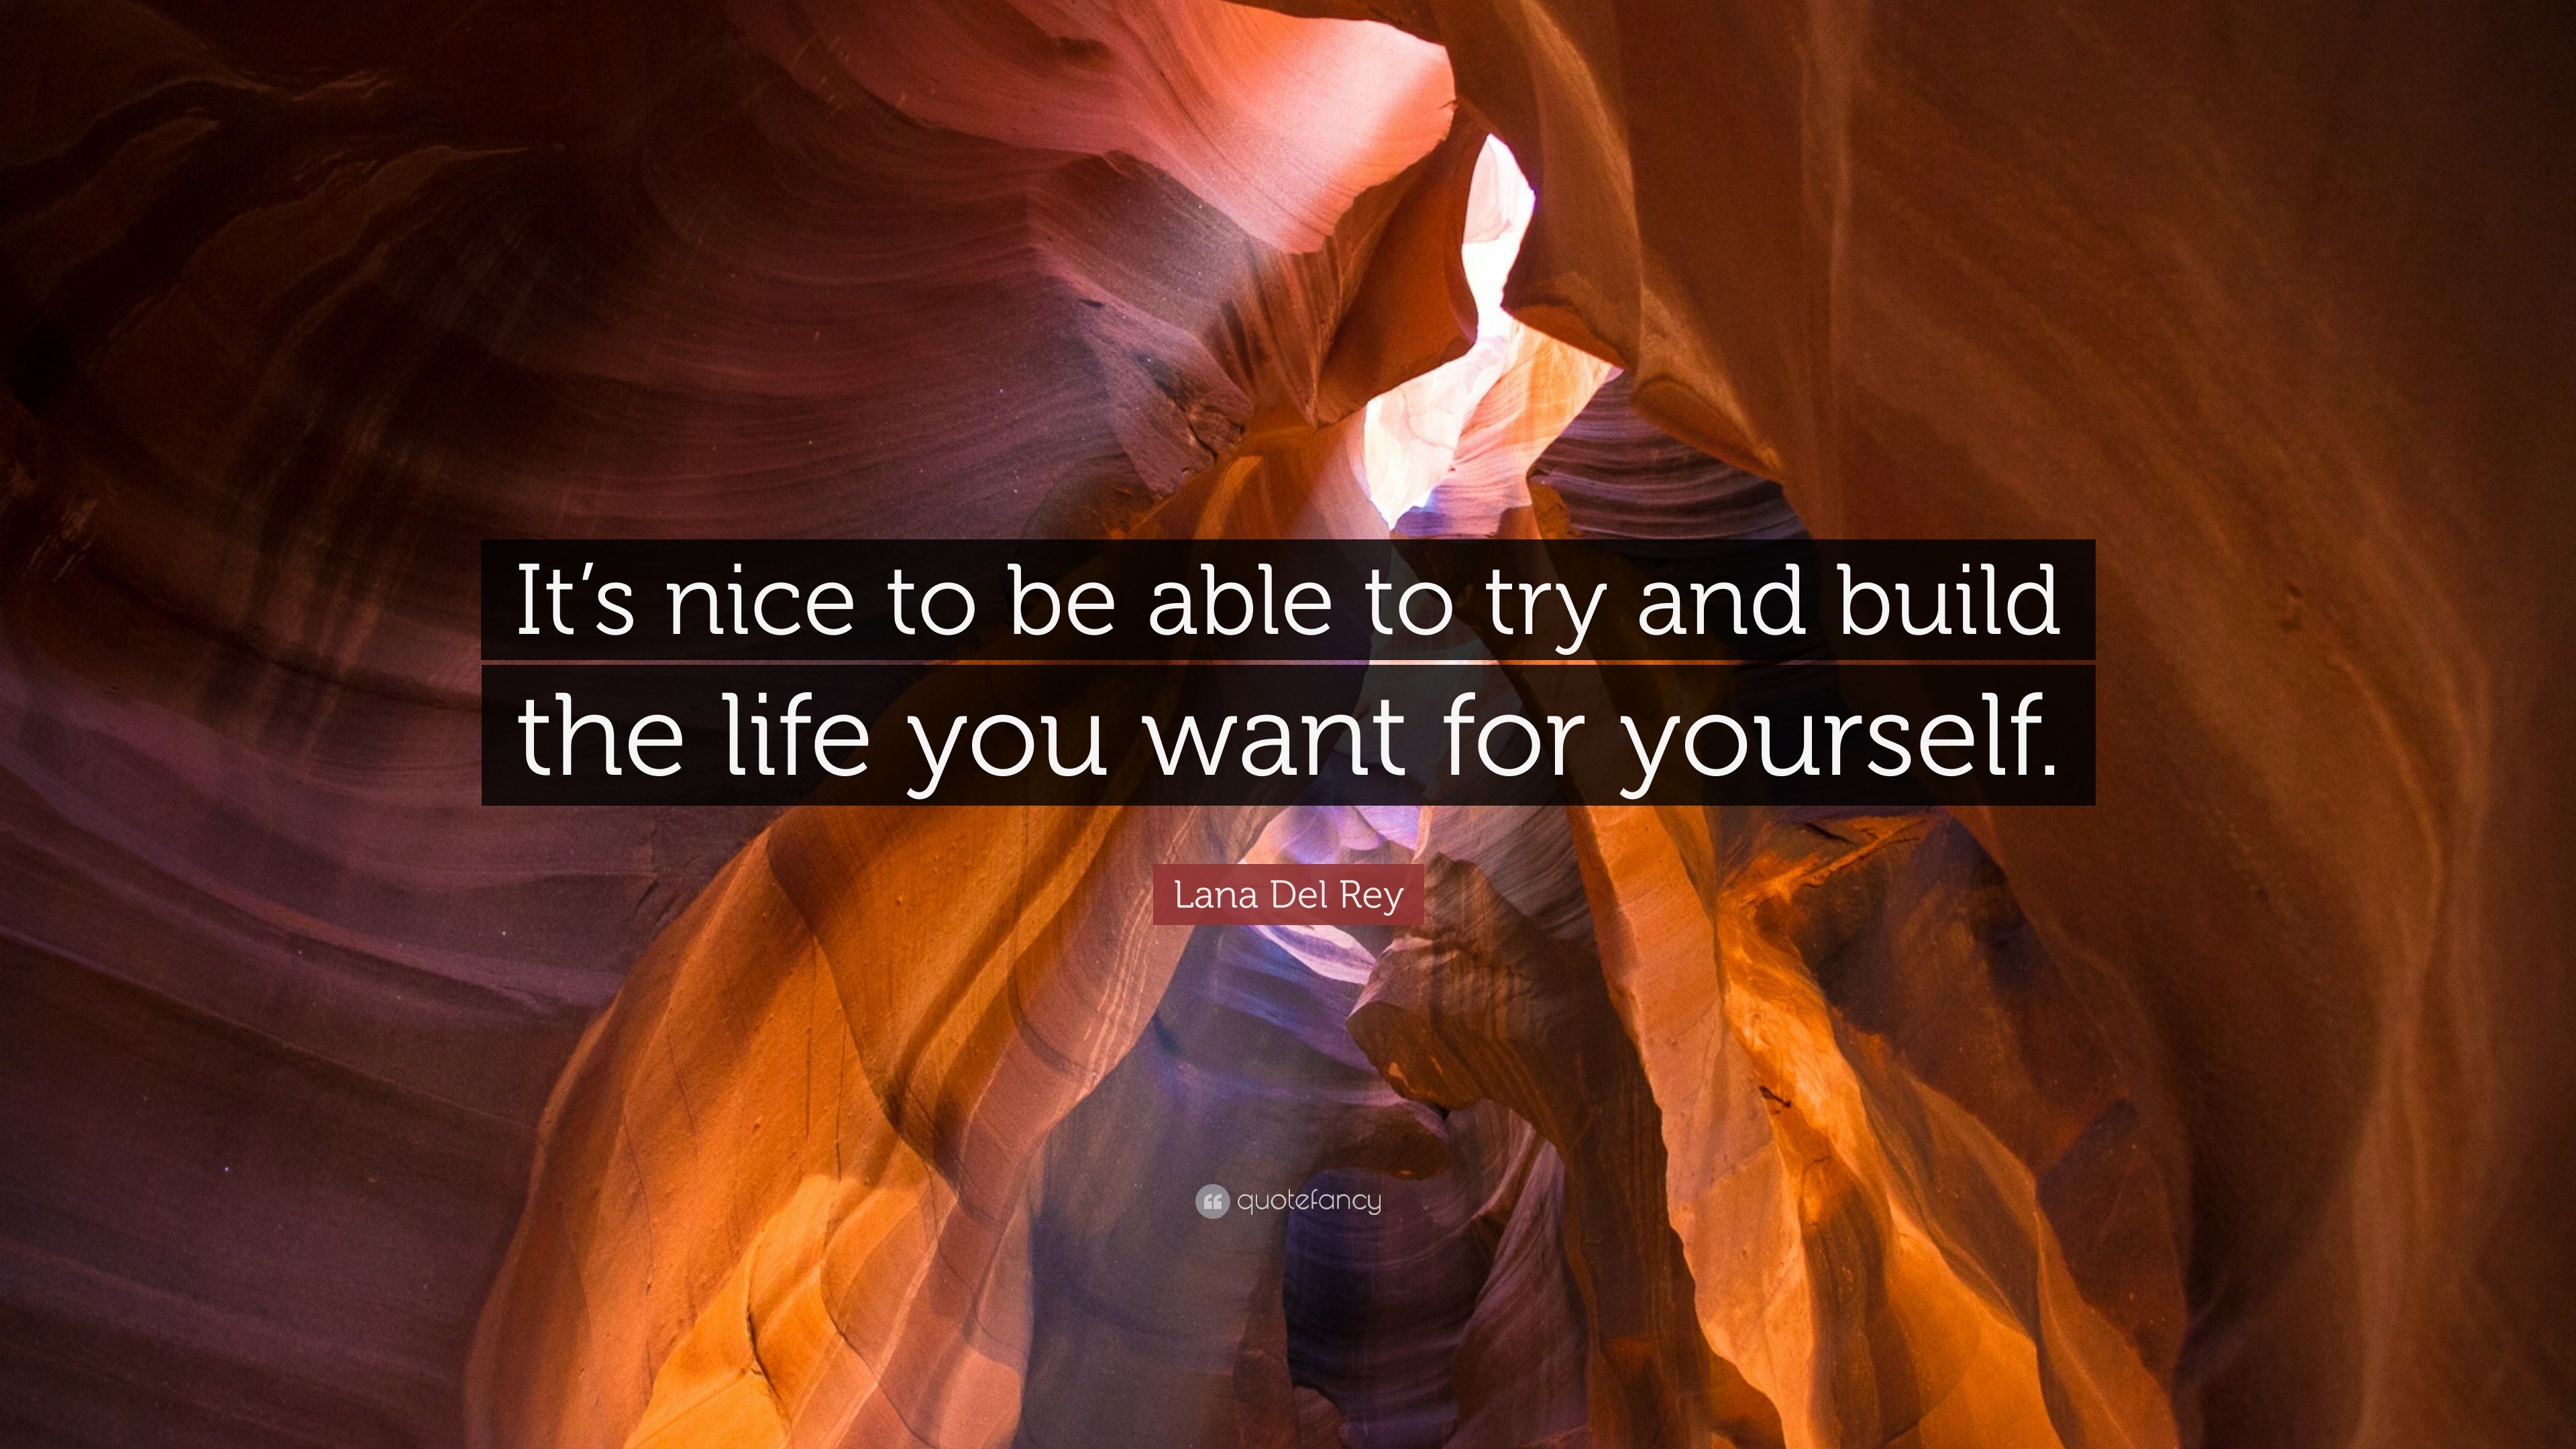 https://quotefancy.com/media/wallpaper/3840x2160/408584-Lana-Del-Rey-Quote-It-s-nice-to-be-able-to-try-and-build-the-life.jpg